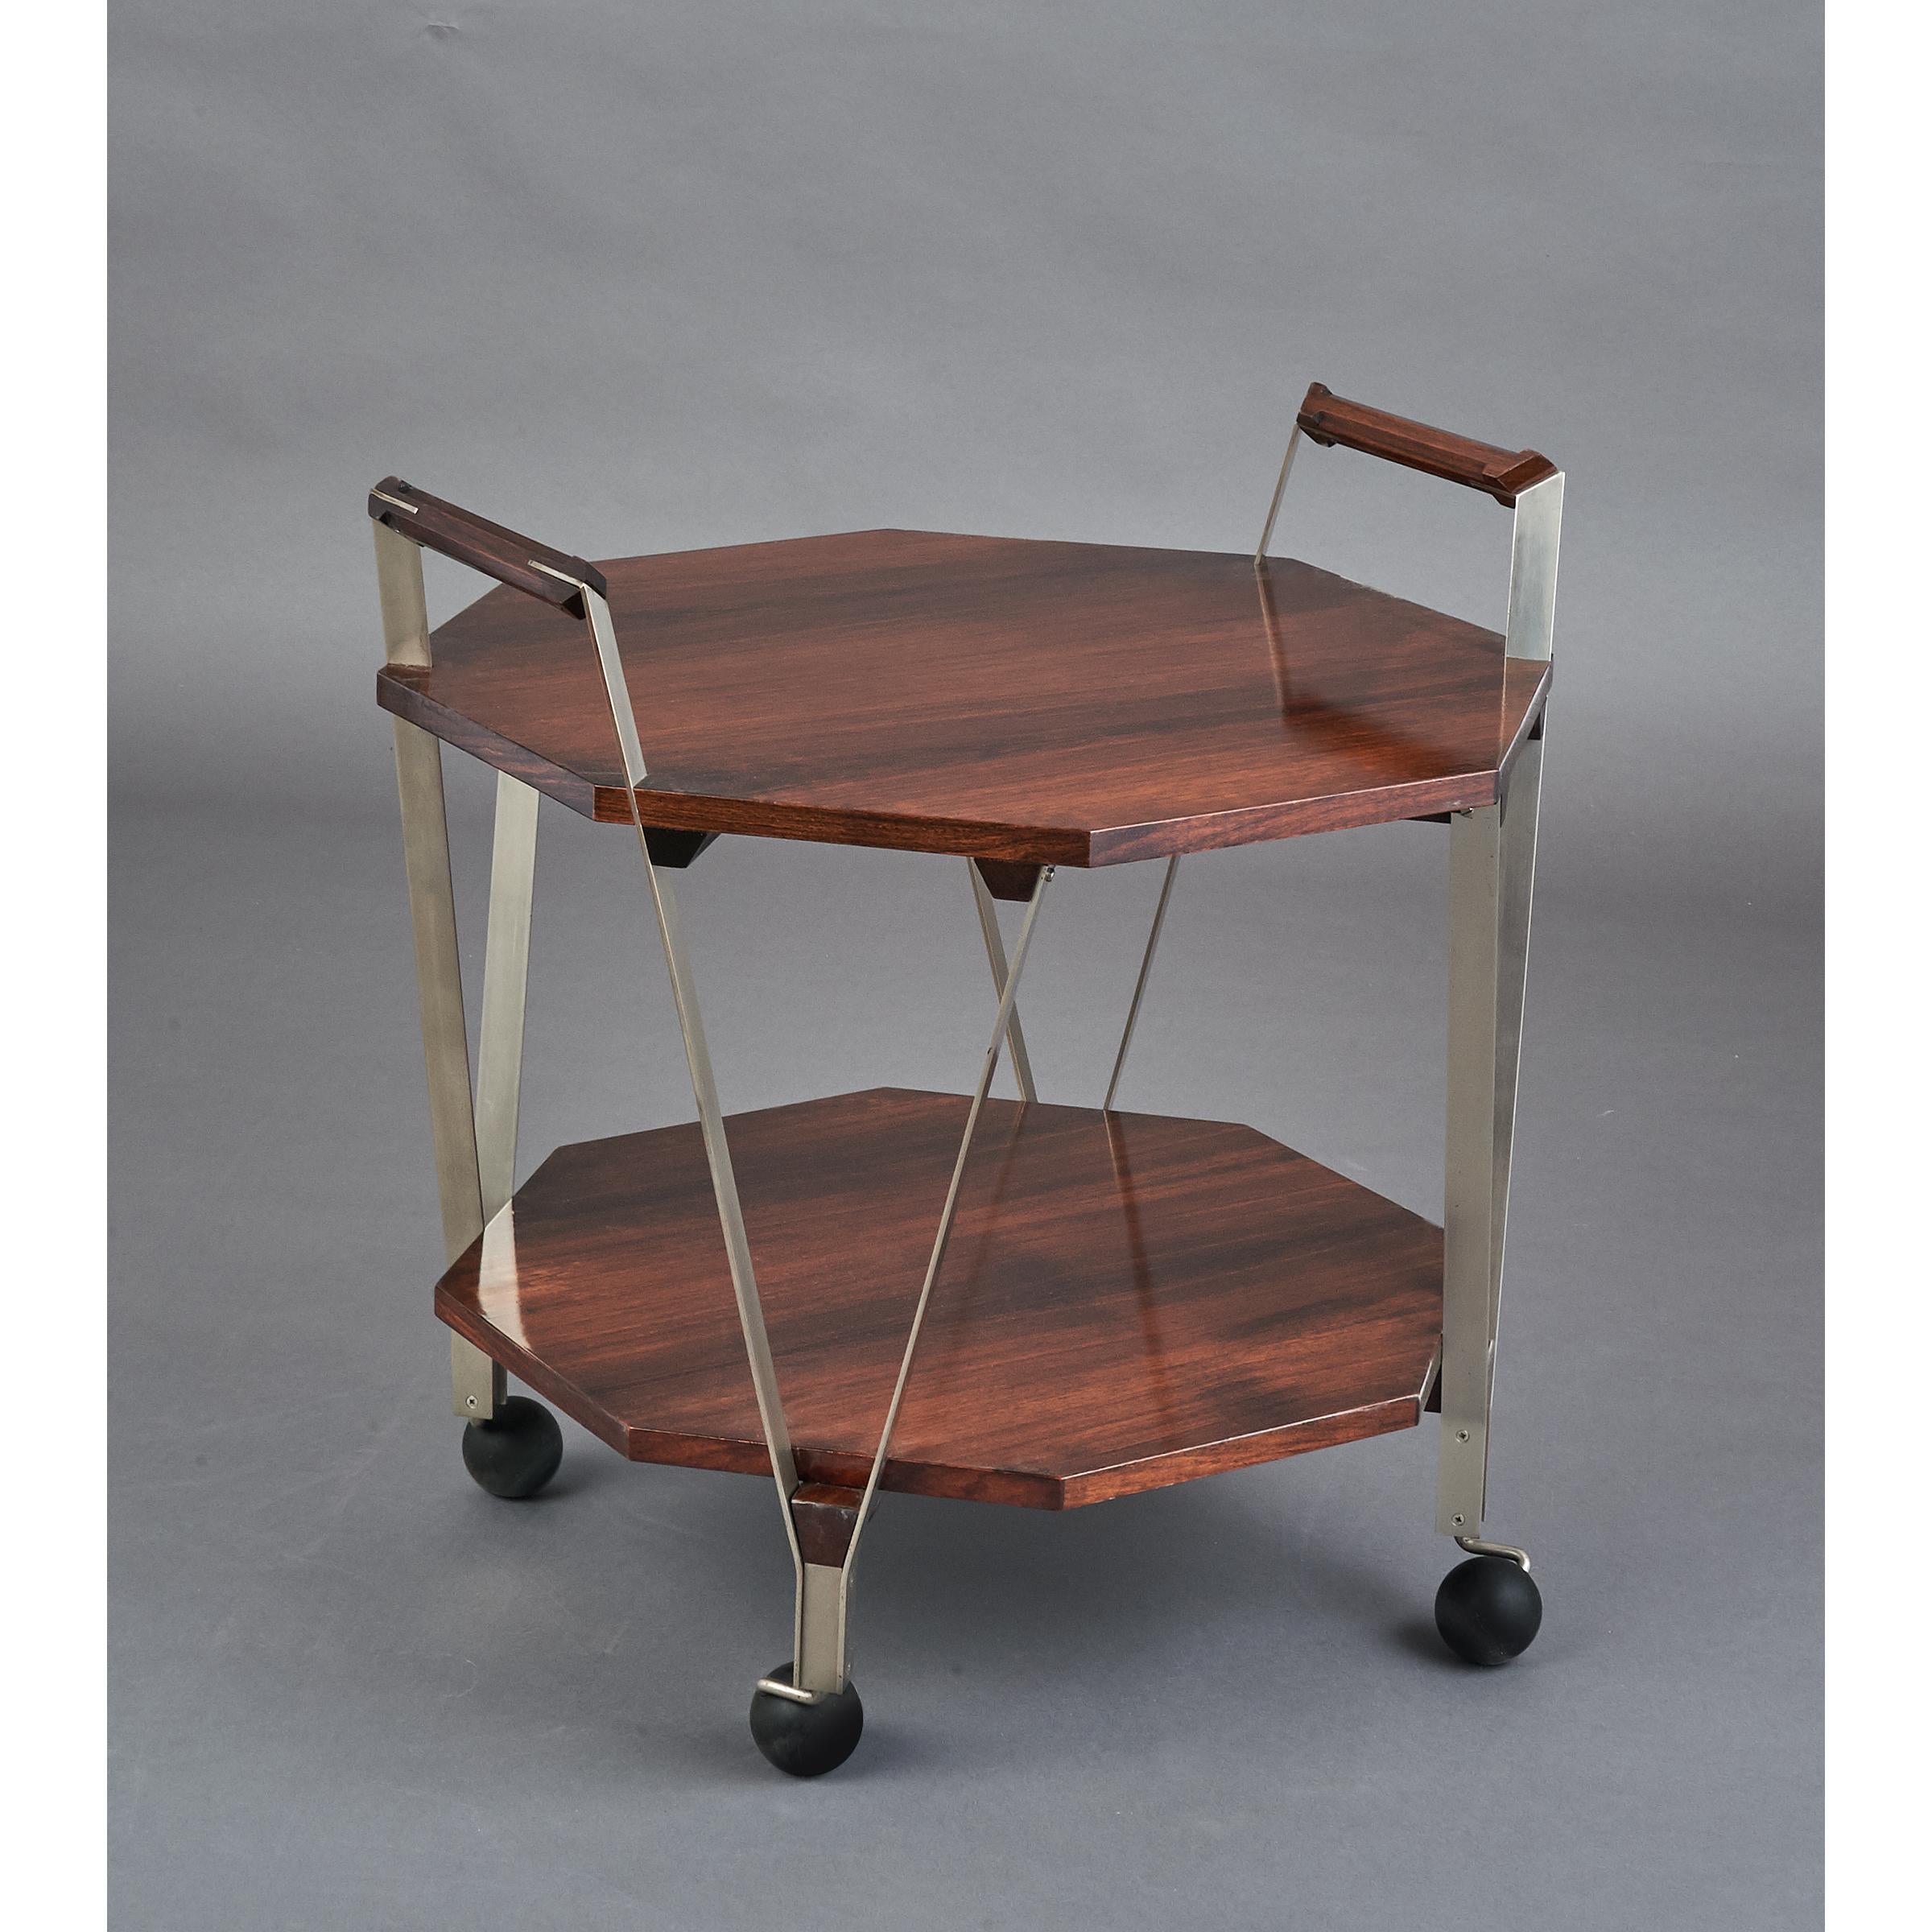 Ico Parisi, (1916-1996)
An elegant modernist two-tier octagonal rosewood rolling cart with geometric handles, satin nickeled brass mounts
Italy, 1959
Ref: Ico Parisi Catalogue Raisonné p.597
Size: 24 W x 24 D x 21 / 26 H.
TWO AVAILABLE
Sold and